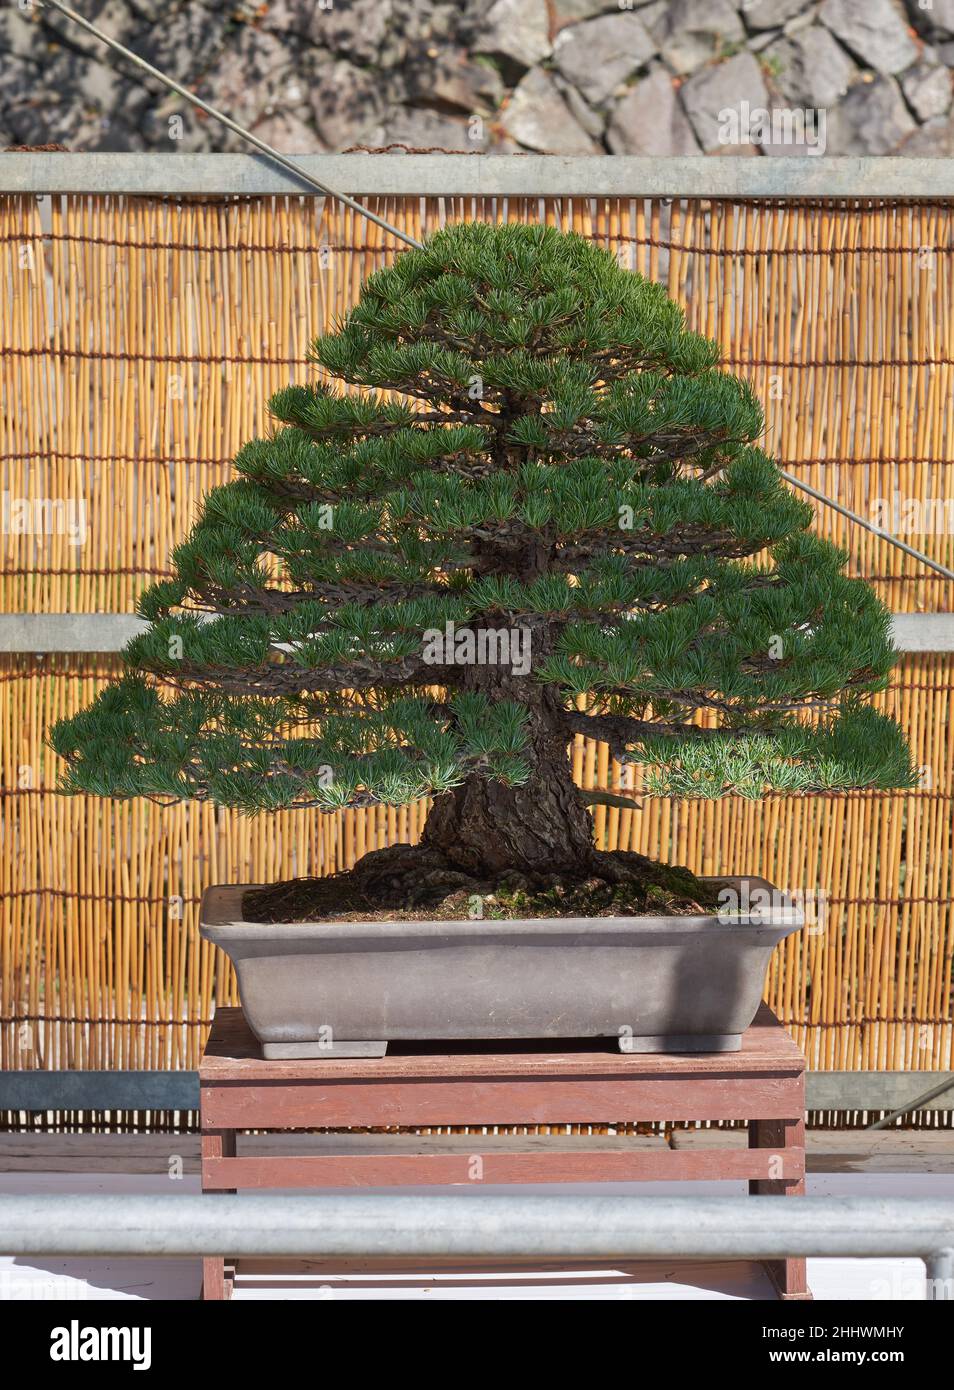 Nagoya, Japan – October 20, 2019: The view of the decorative bonsai tree of Five needle pine (Japanese white pine) at the annual Nagoya Castle Bonsai Stock Photo